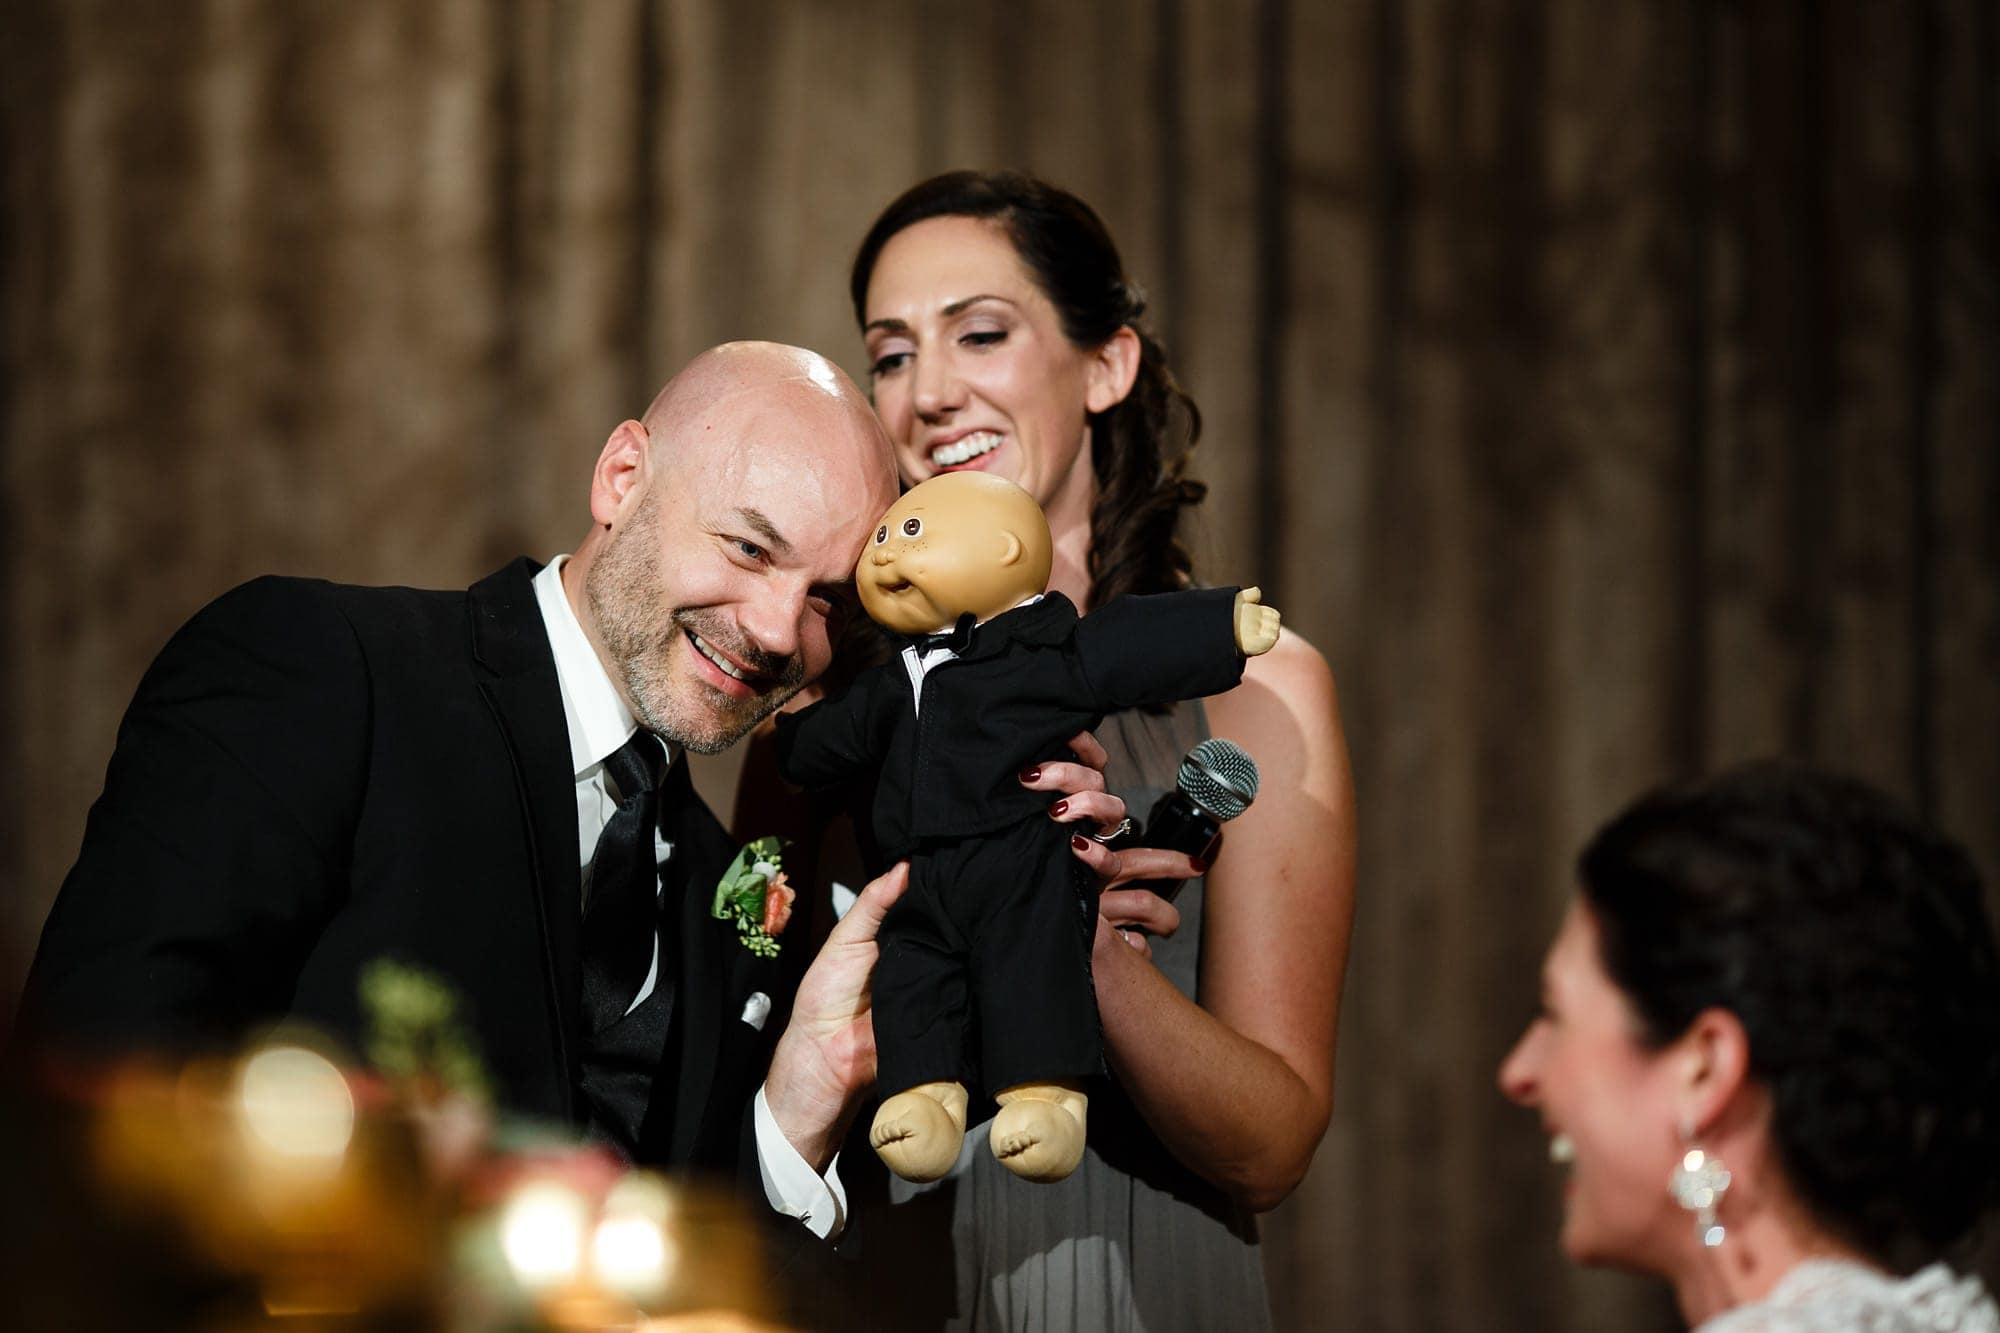 Brad aknowledges his resembelance to a cabbage patch doll as Christina's sister gives a speech during their Bridgeport Art Center wedding